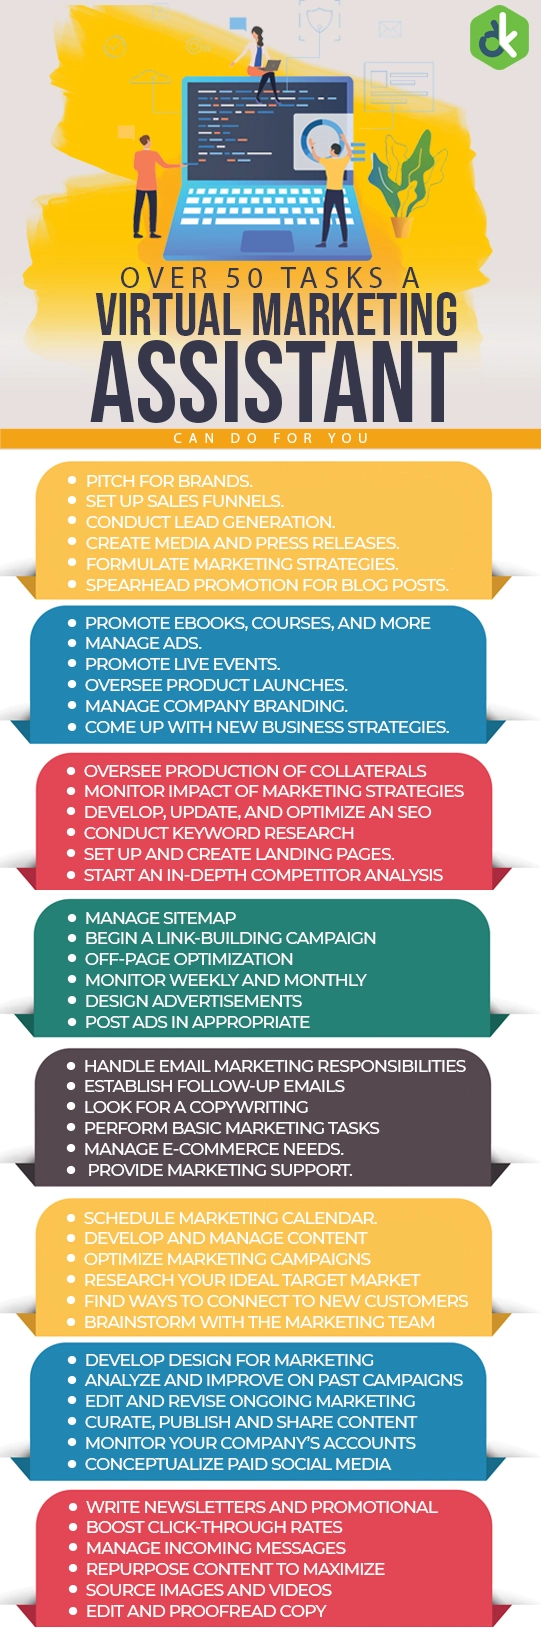 An info-graphic showing 8 blocks of items. Each block is differently colored and writes the kinds of task a marketing VA can perform. The infographic is titled "Over 50 tasks a virtual marketing assistant can do for you."
